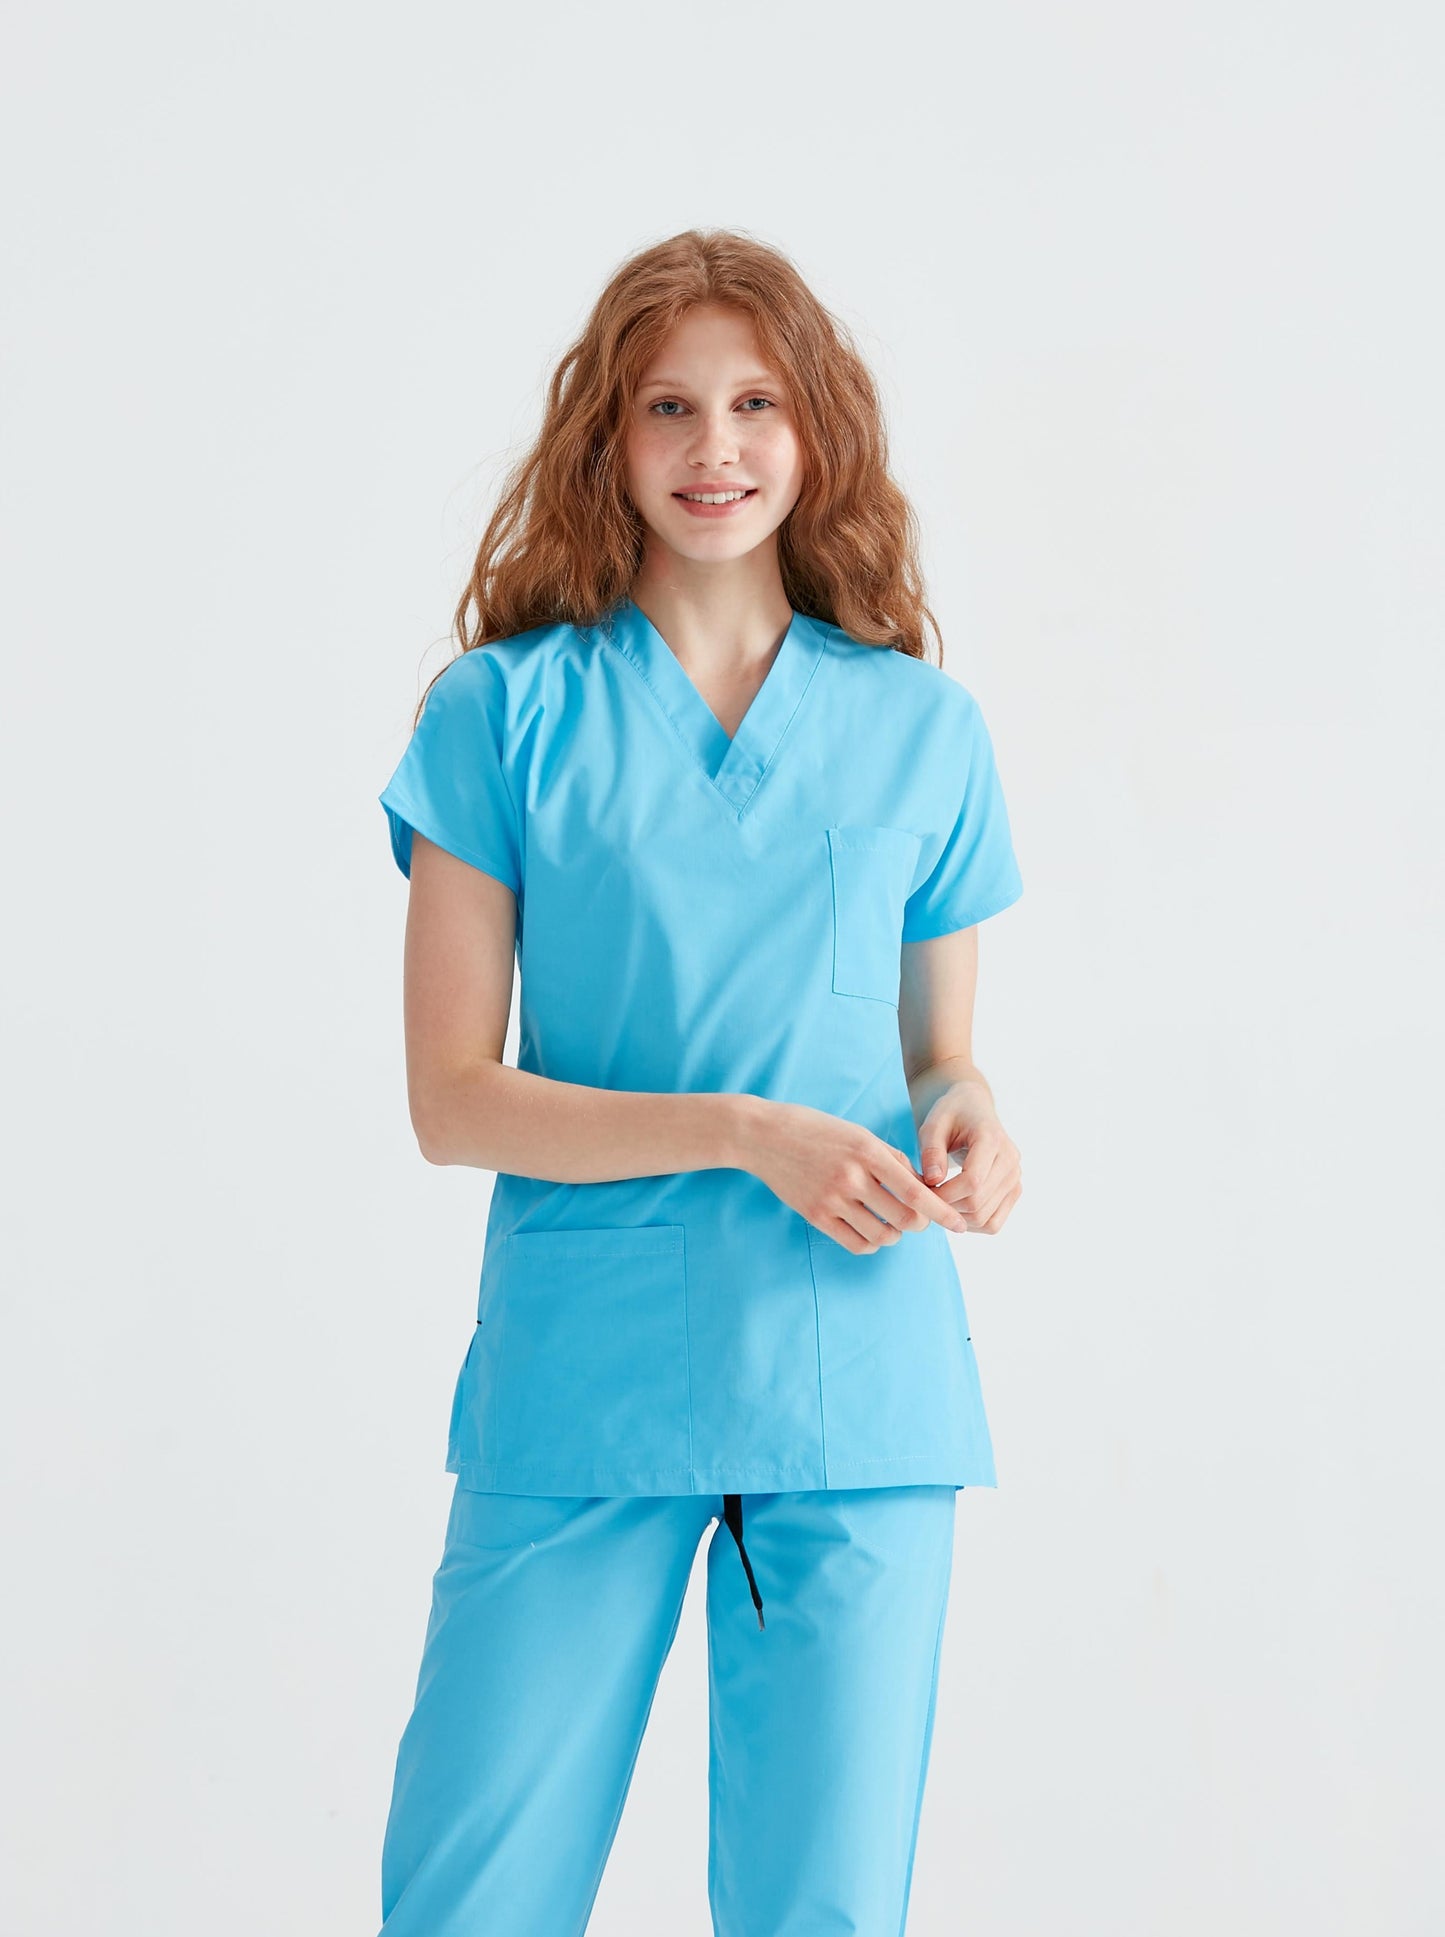 Turquoise Medical Suit, For Women - Classic Model